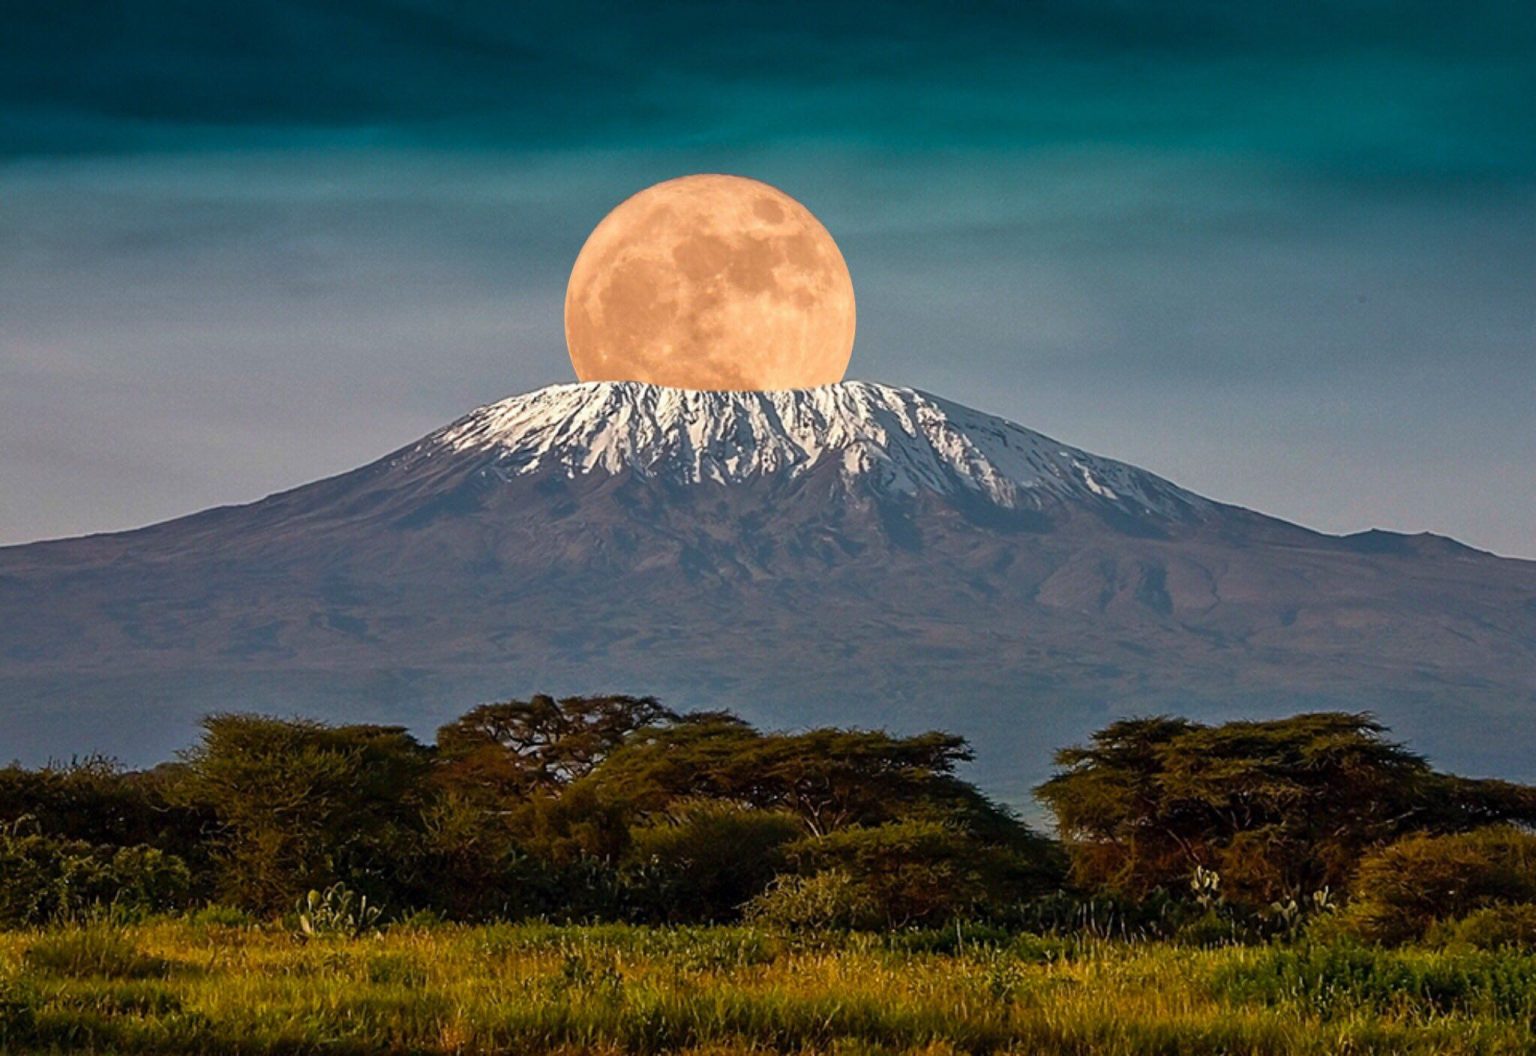 Africa’s majestic icon: Mount Kilimanjaro stands tall